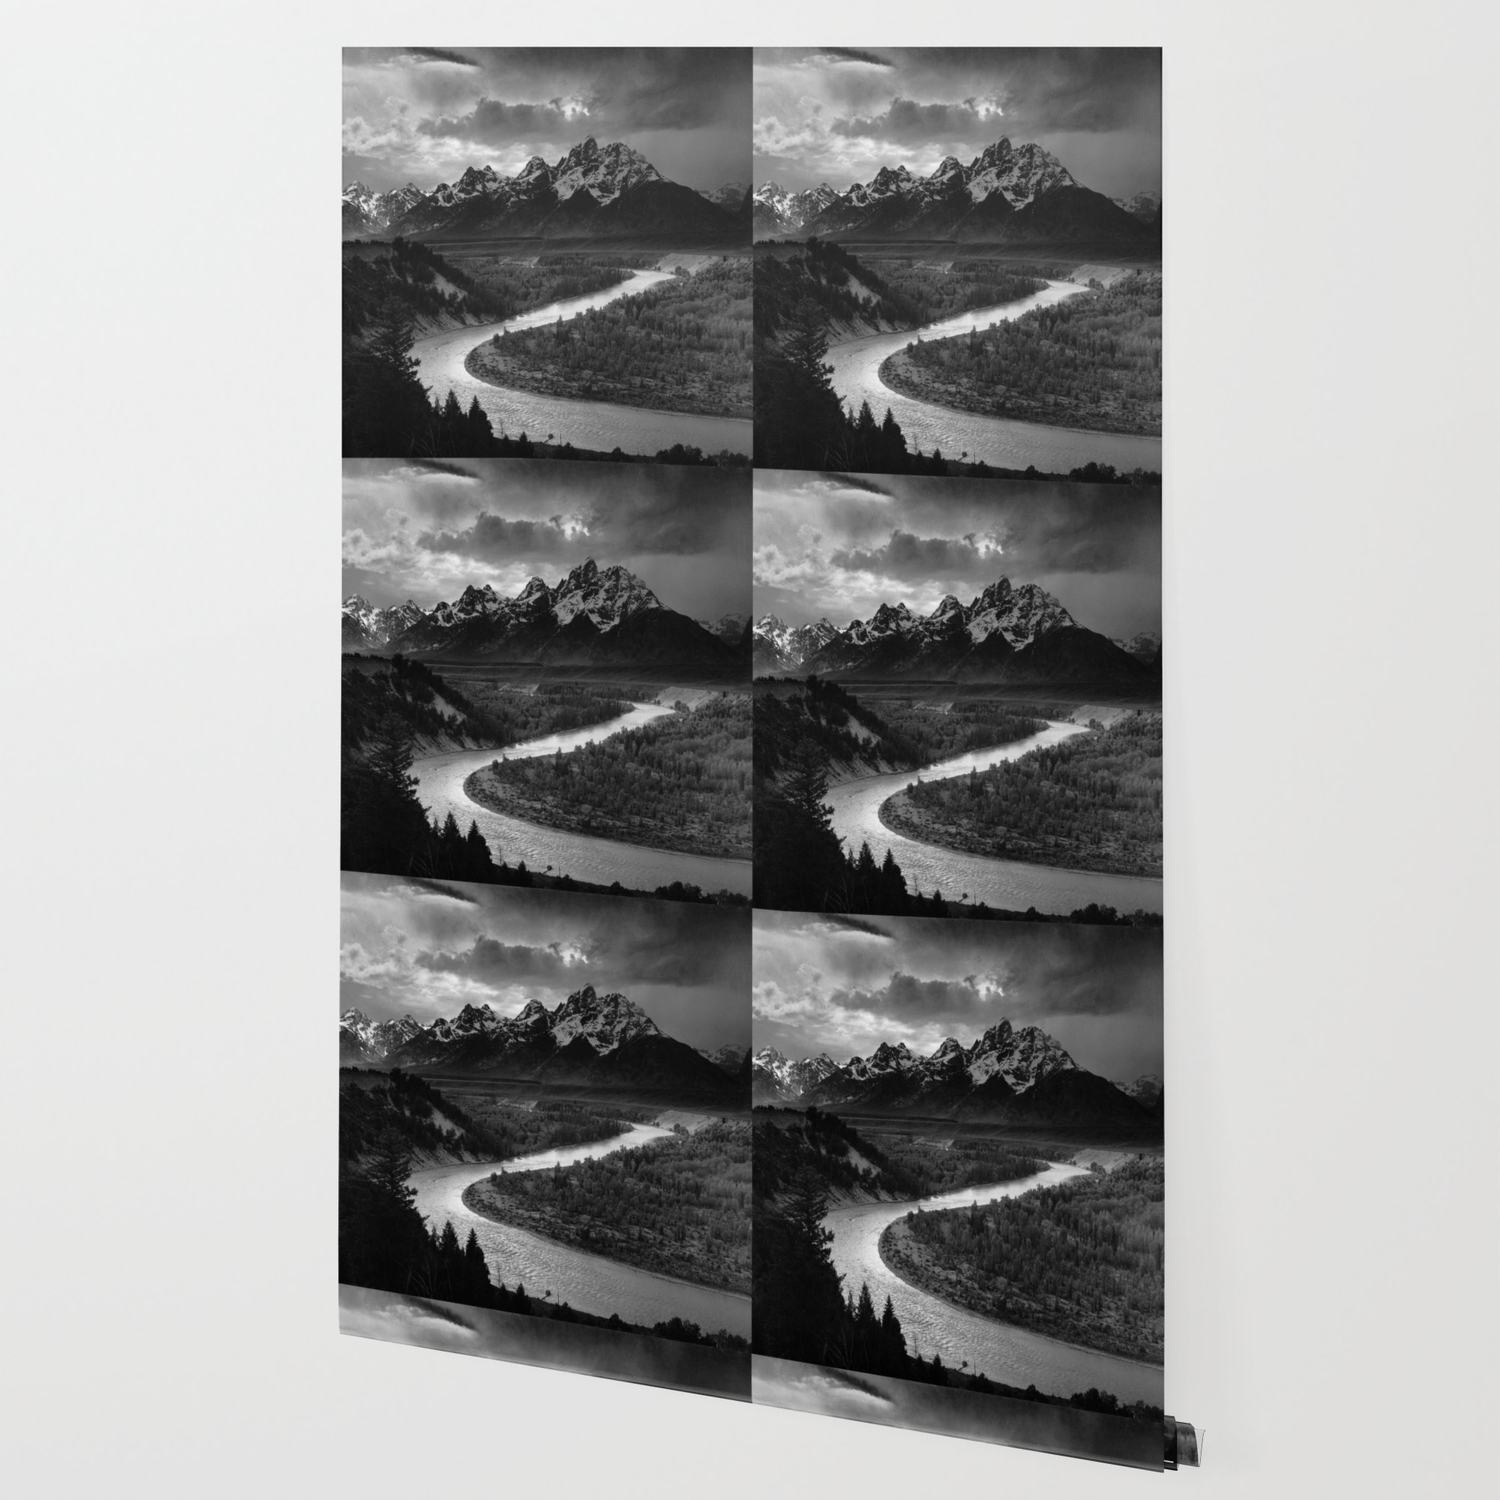 Ansel Adams - The Tetons and Snake River Wallpaper by Elegant Chaos Gallery  | Society6